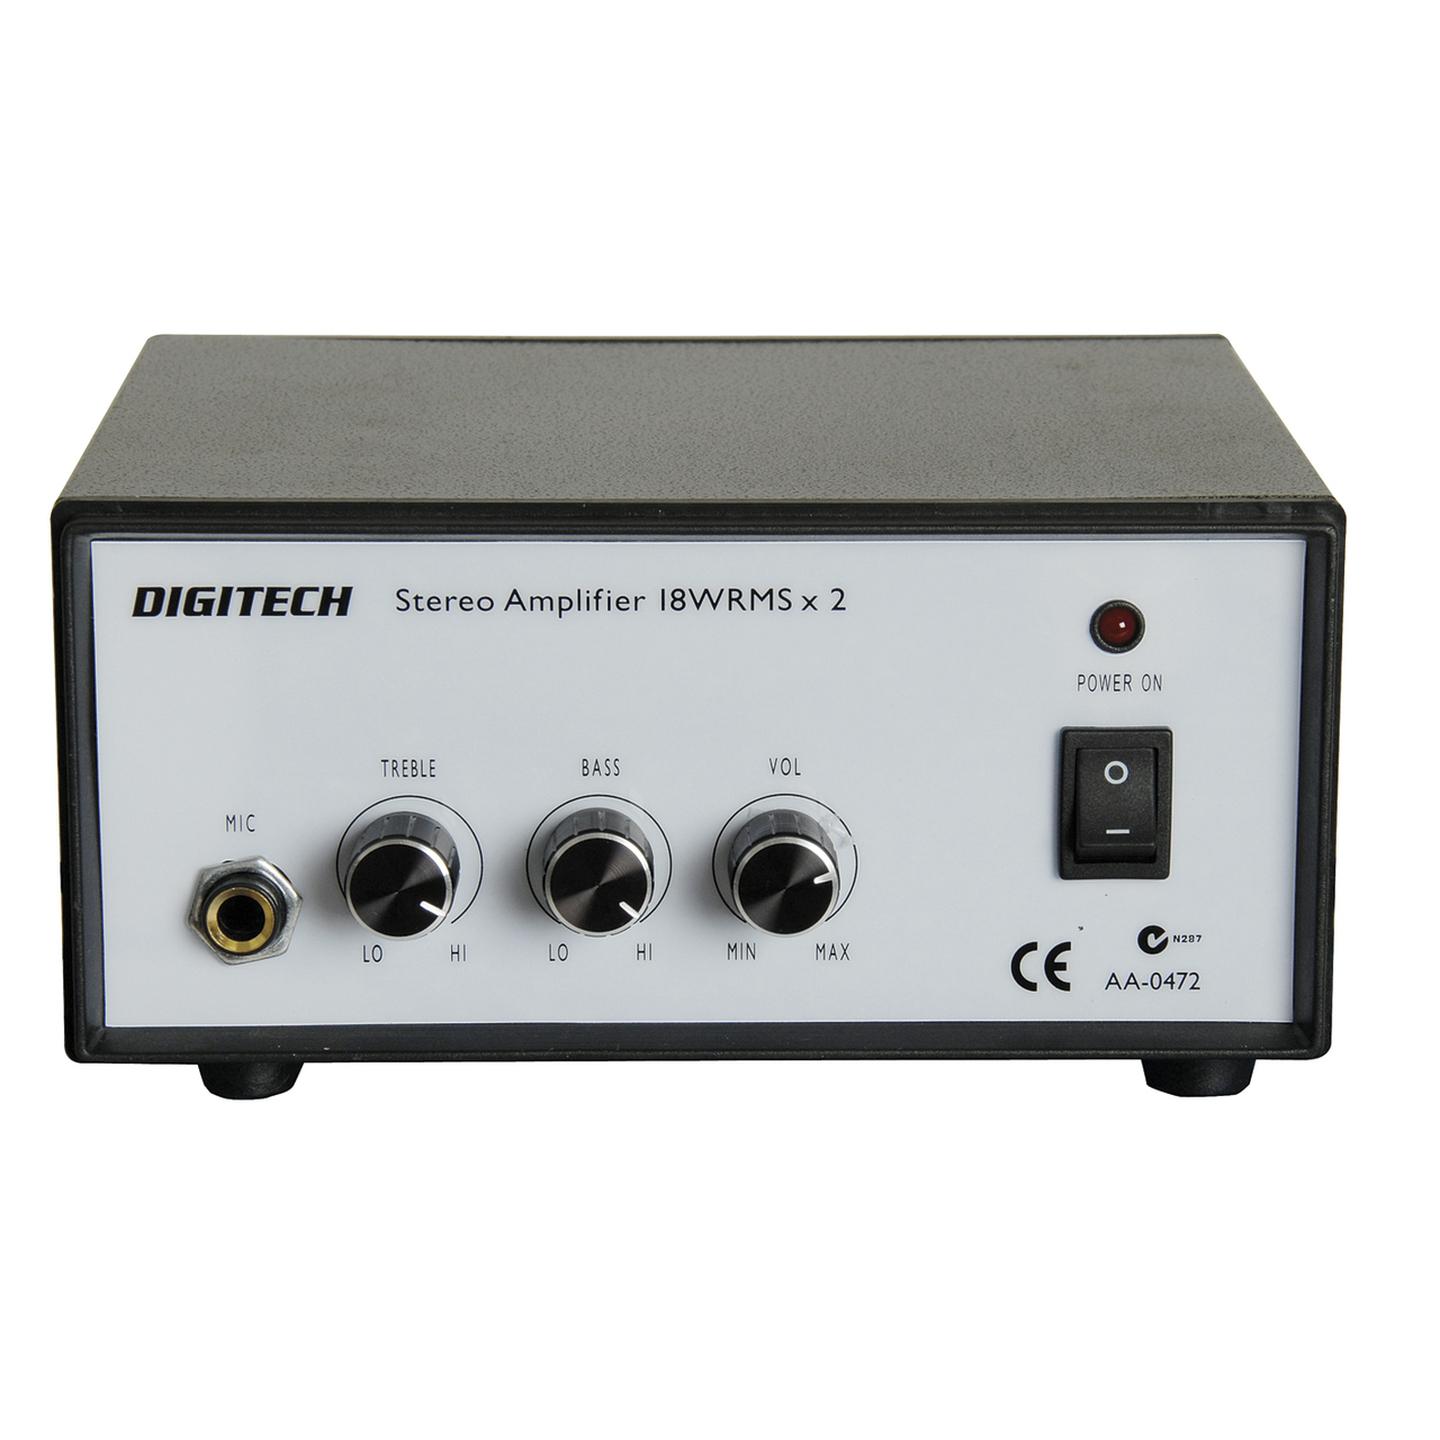 Digitech Low Cost Mains Powered Stereo Amplifier